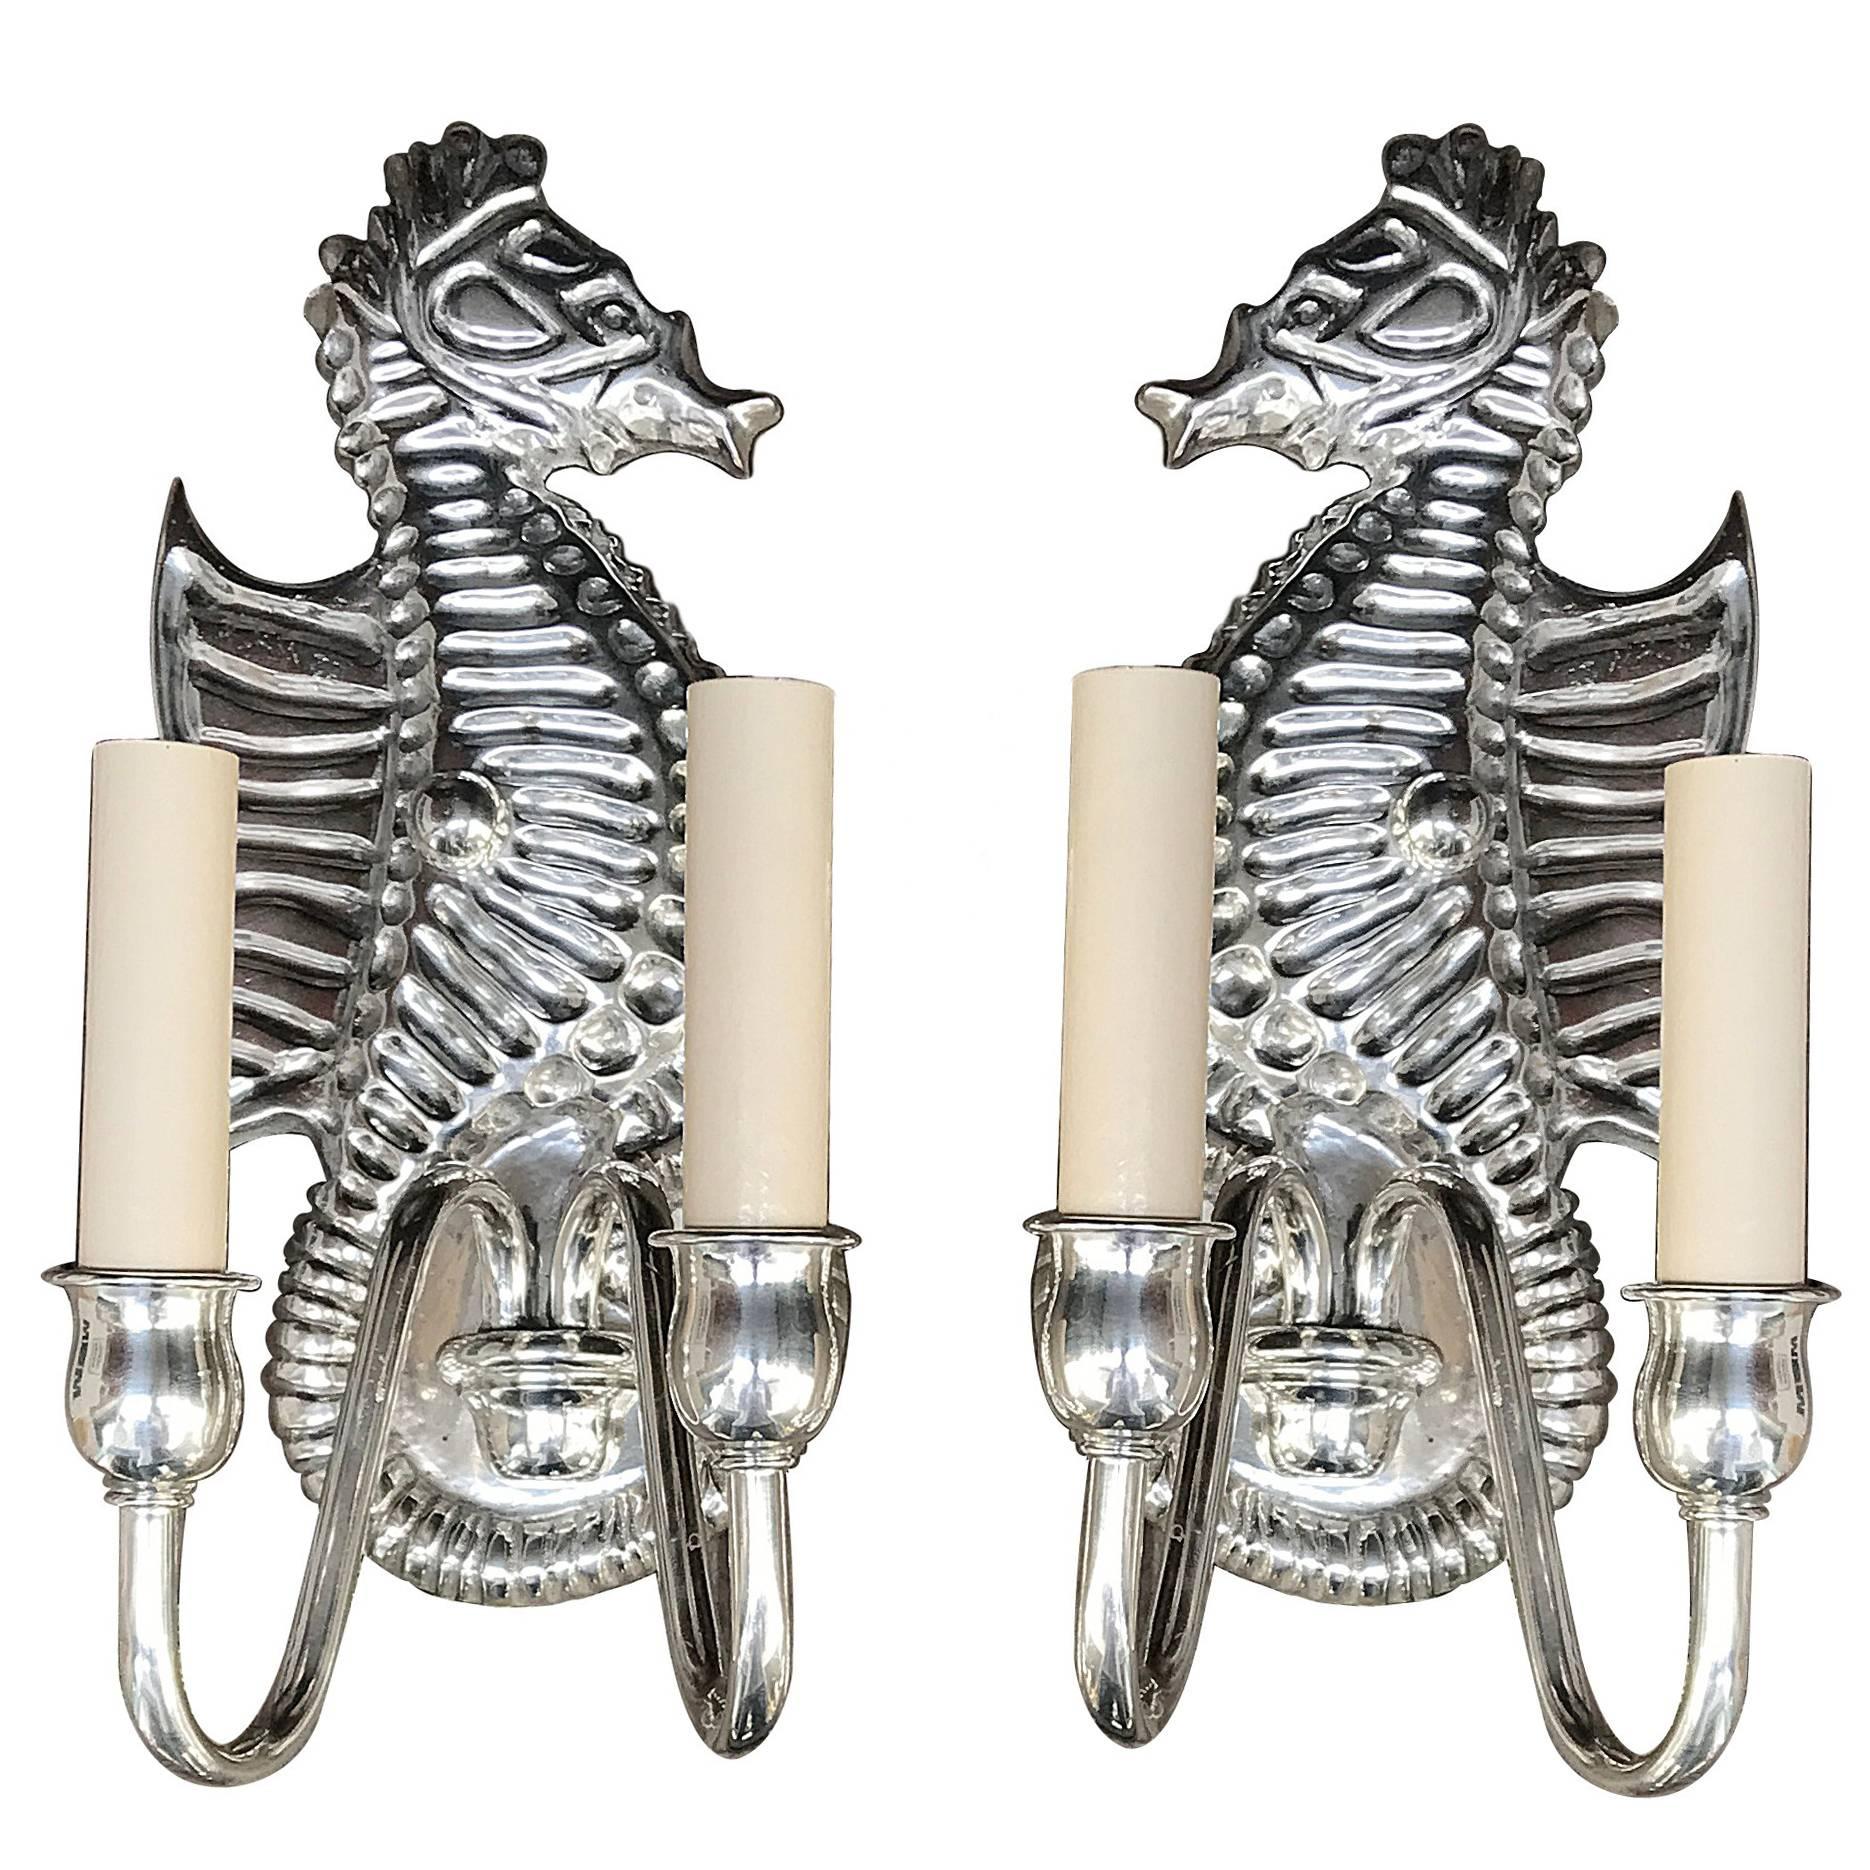 Pair of Silver Plated Sea Horse Sconces